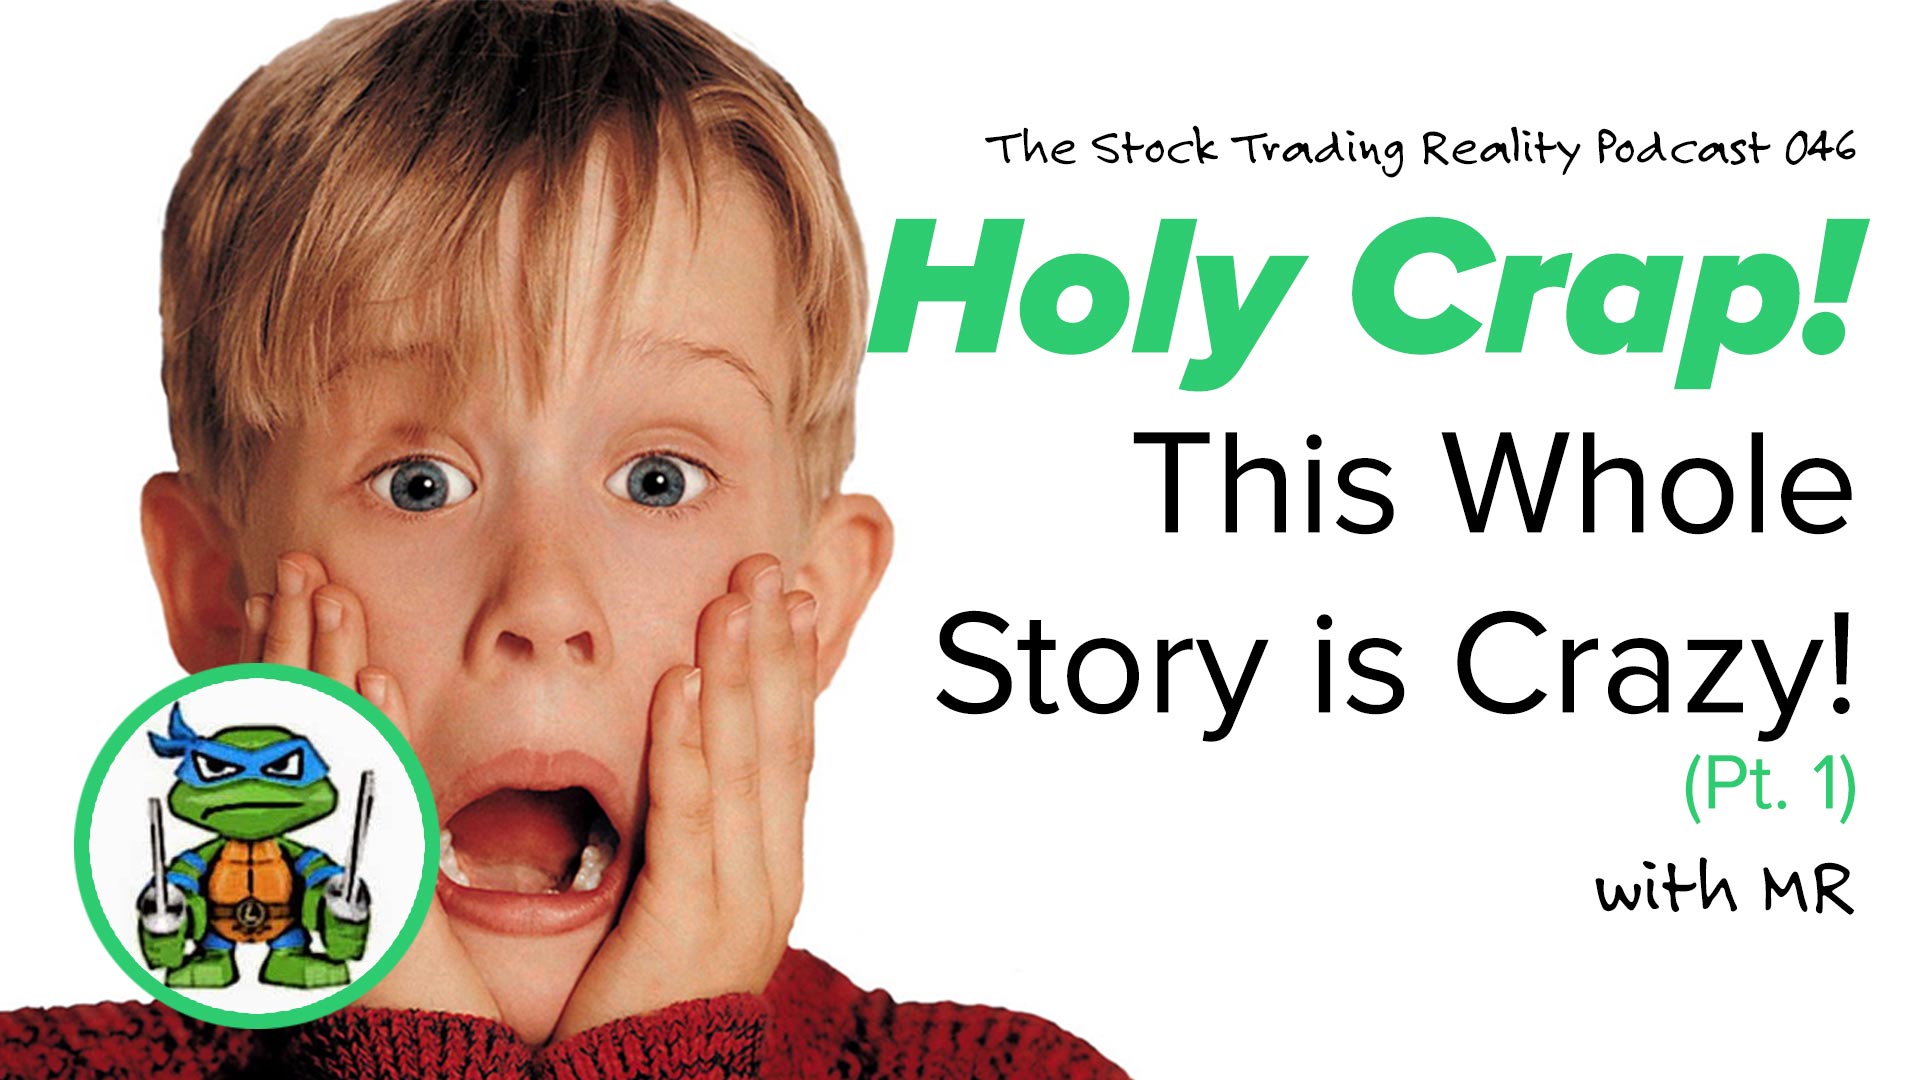 STR 046: Holy Crap! This Whole Story is Crazy! (Pt. 1)